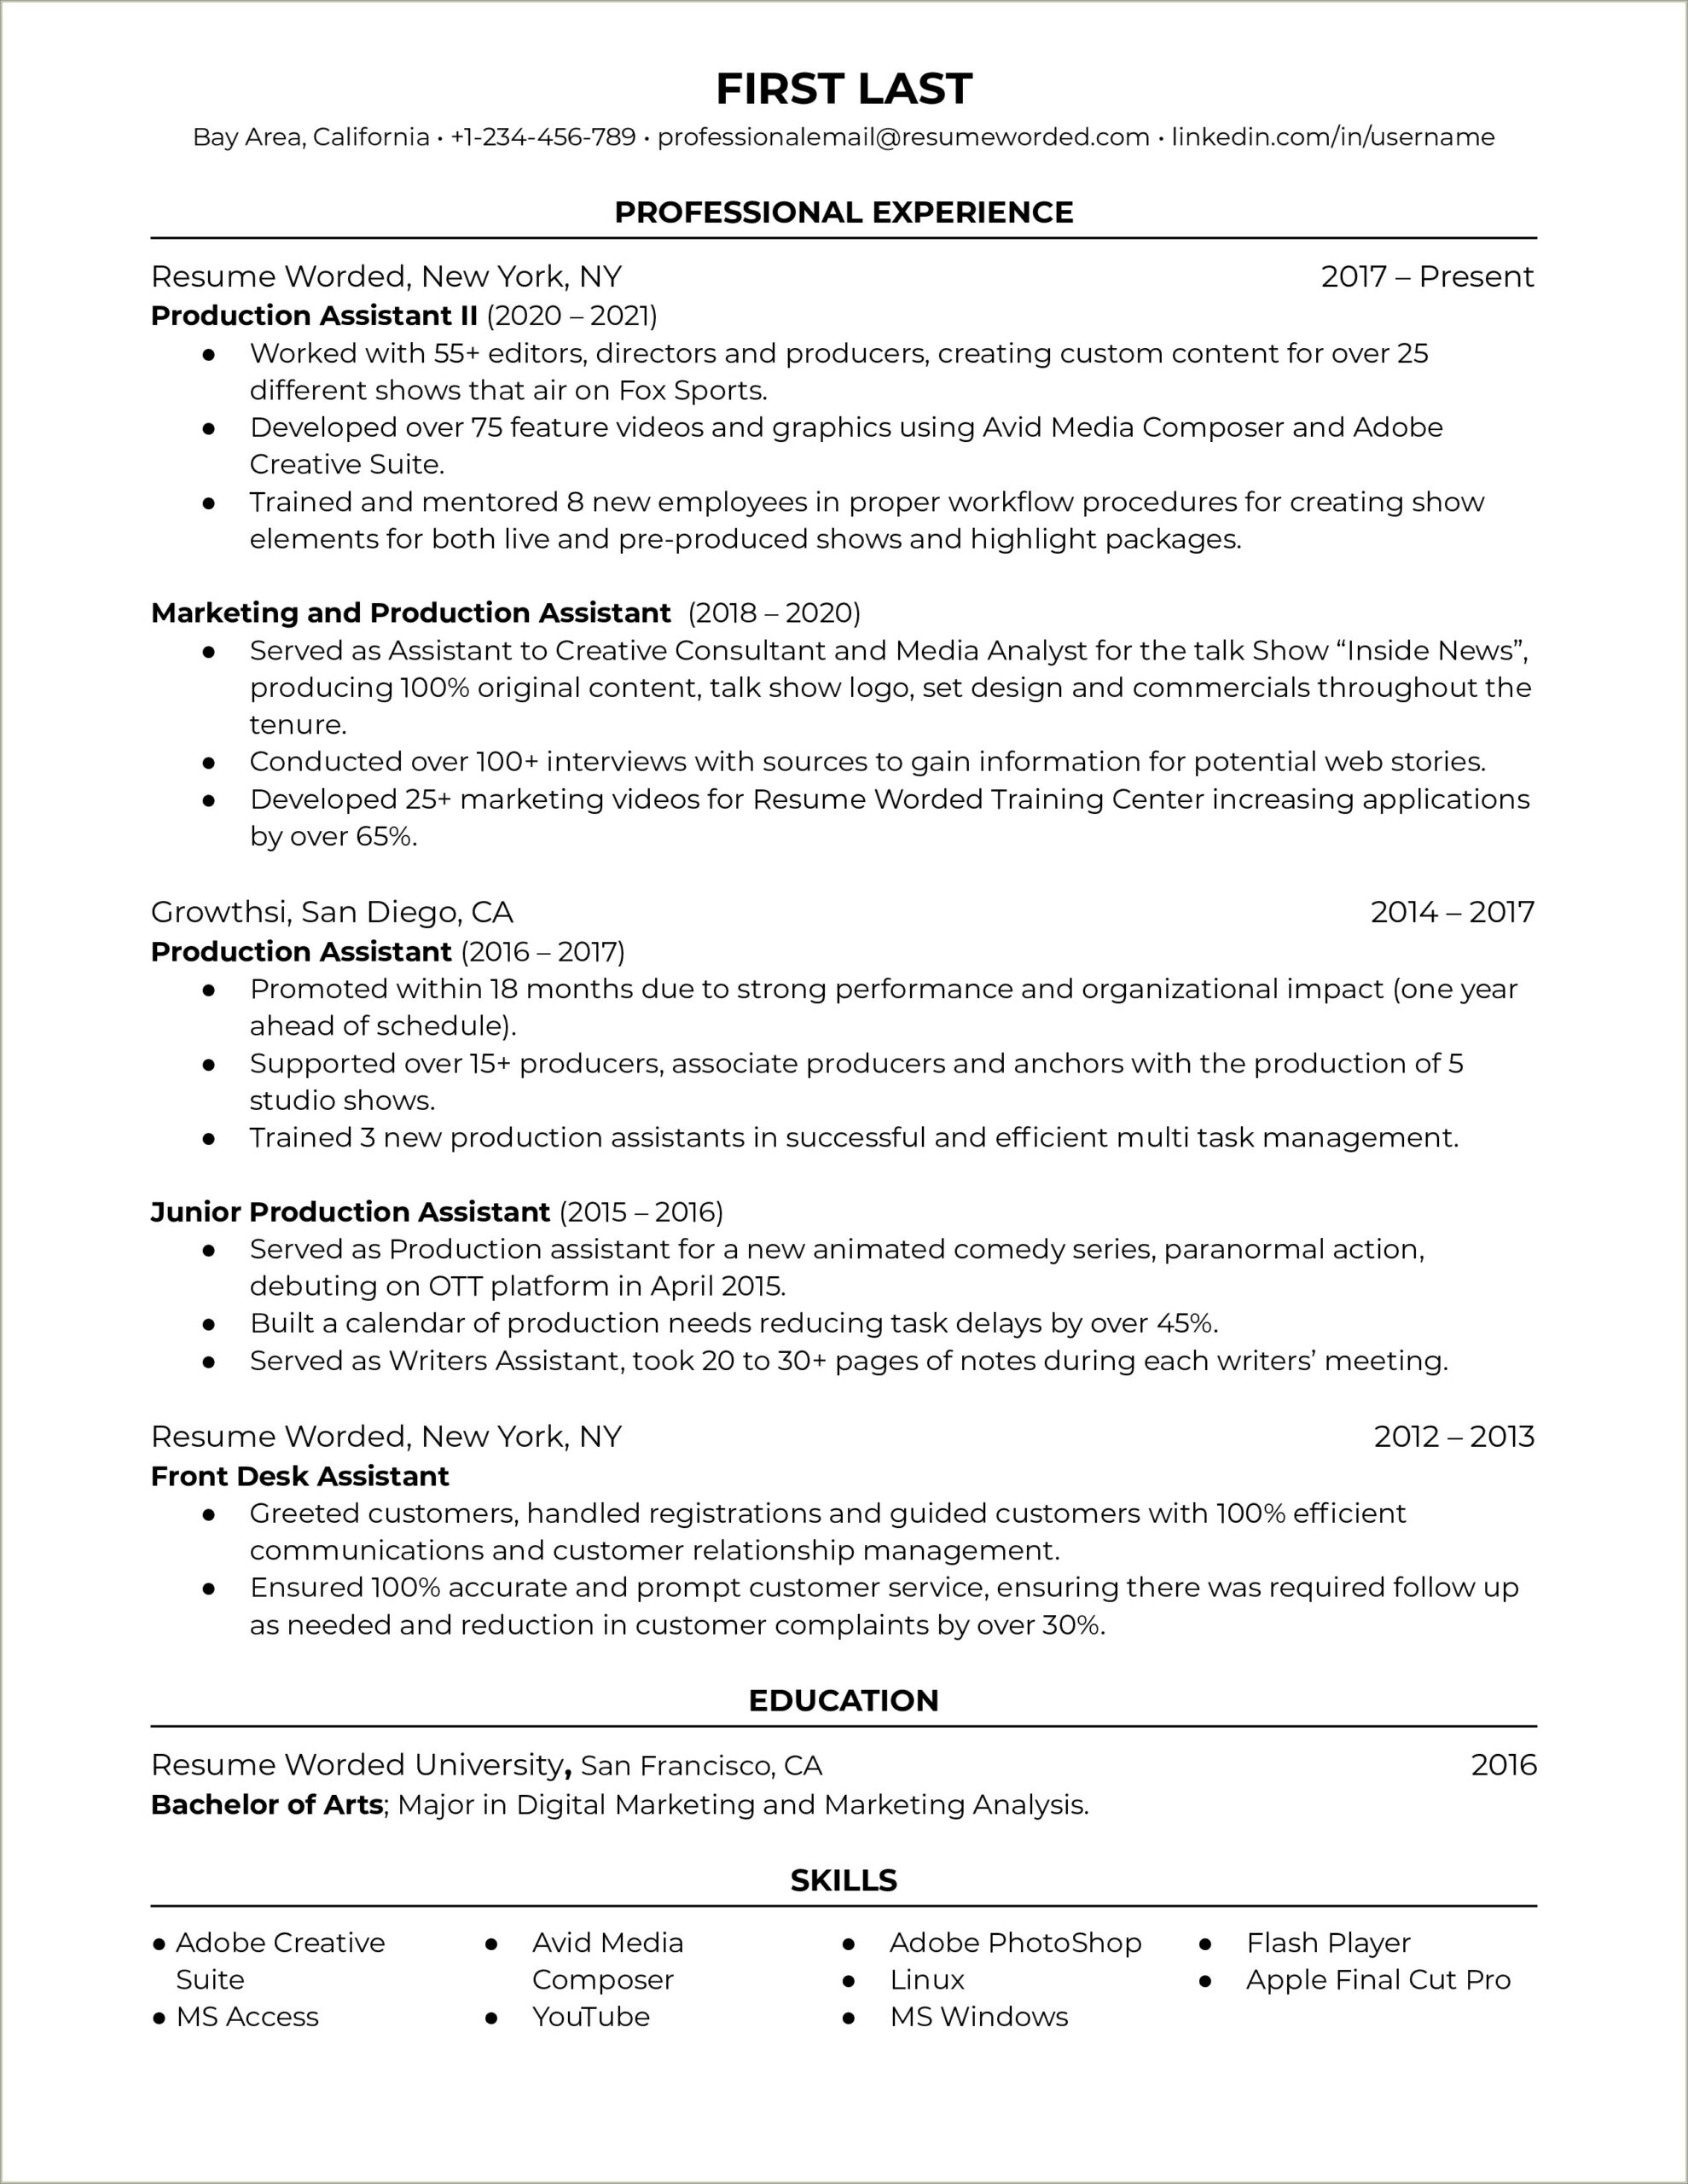 Sample Resume For An Entertainment Industry